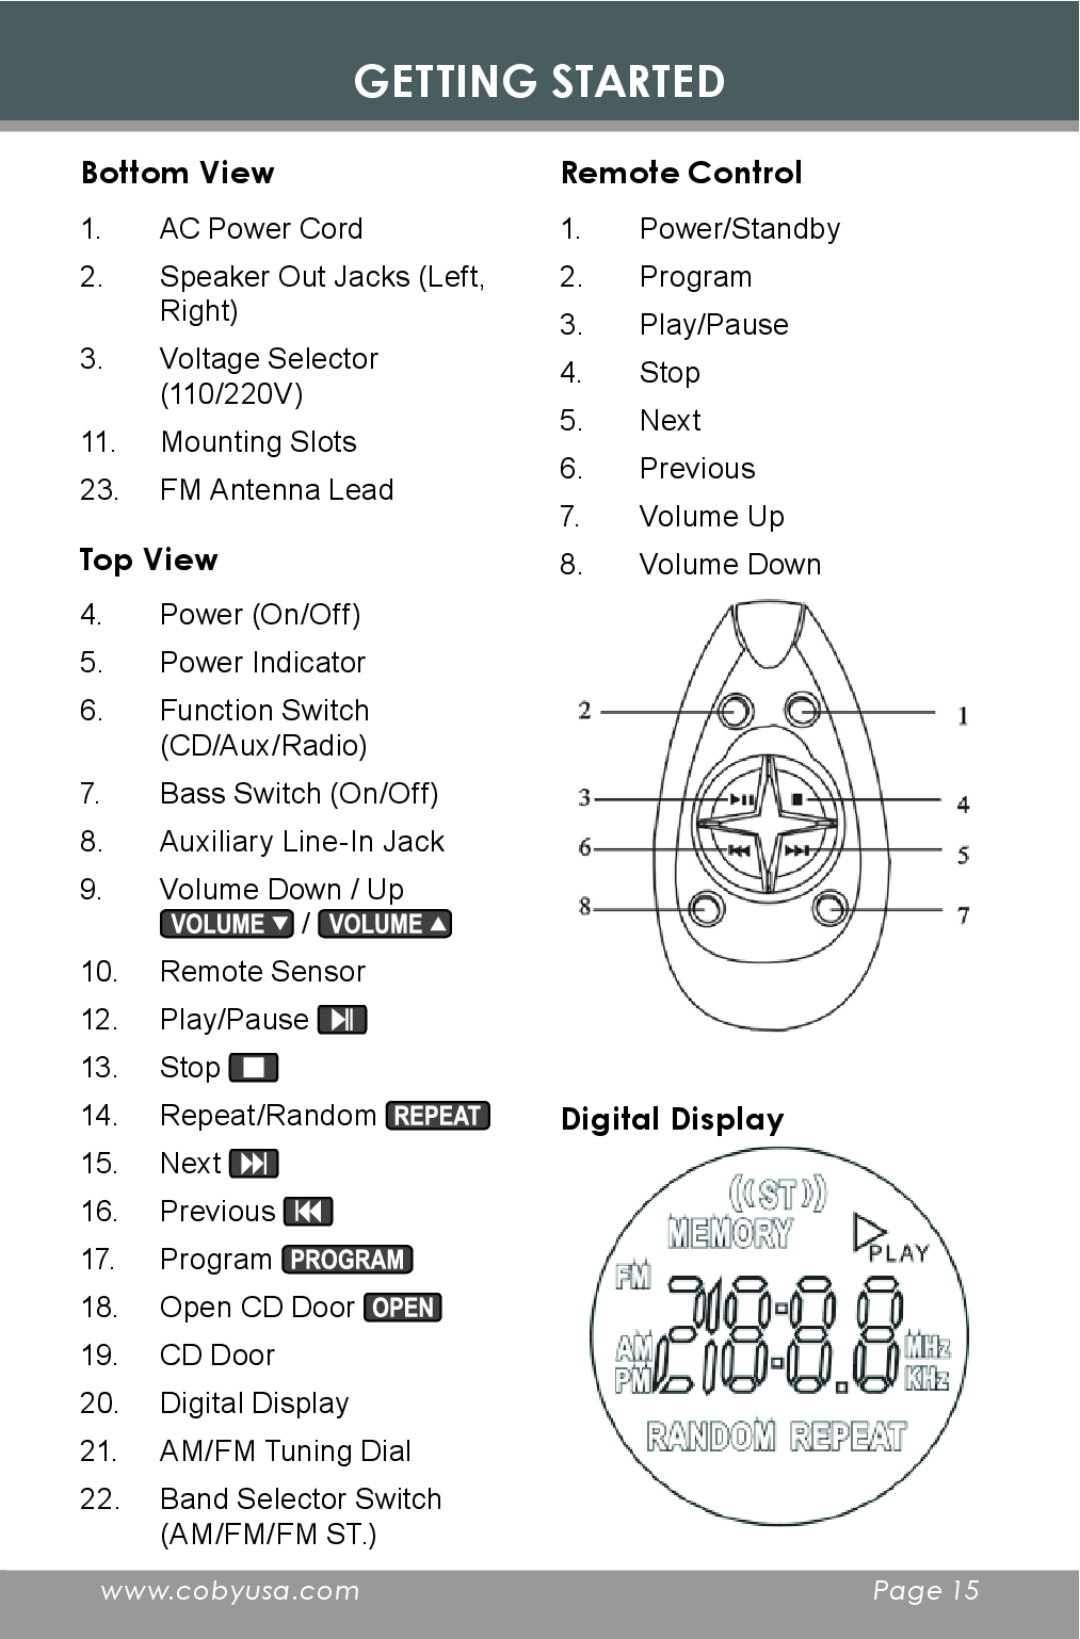 COBY electronic CX-CD377 instruction manual Bottom View, Top View, Remote Control, Digital Display, Getting Started 